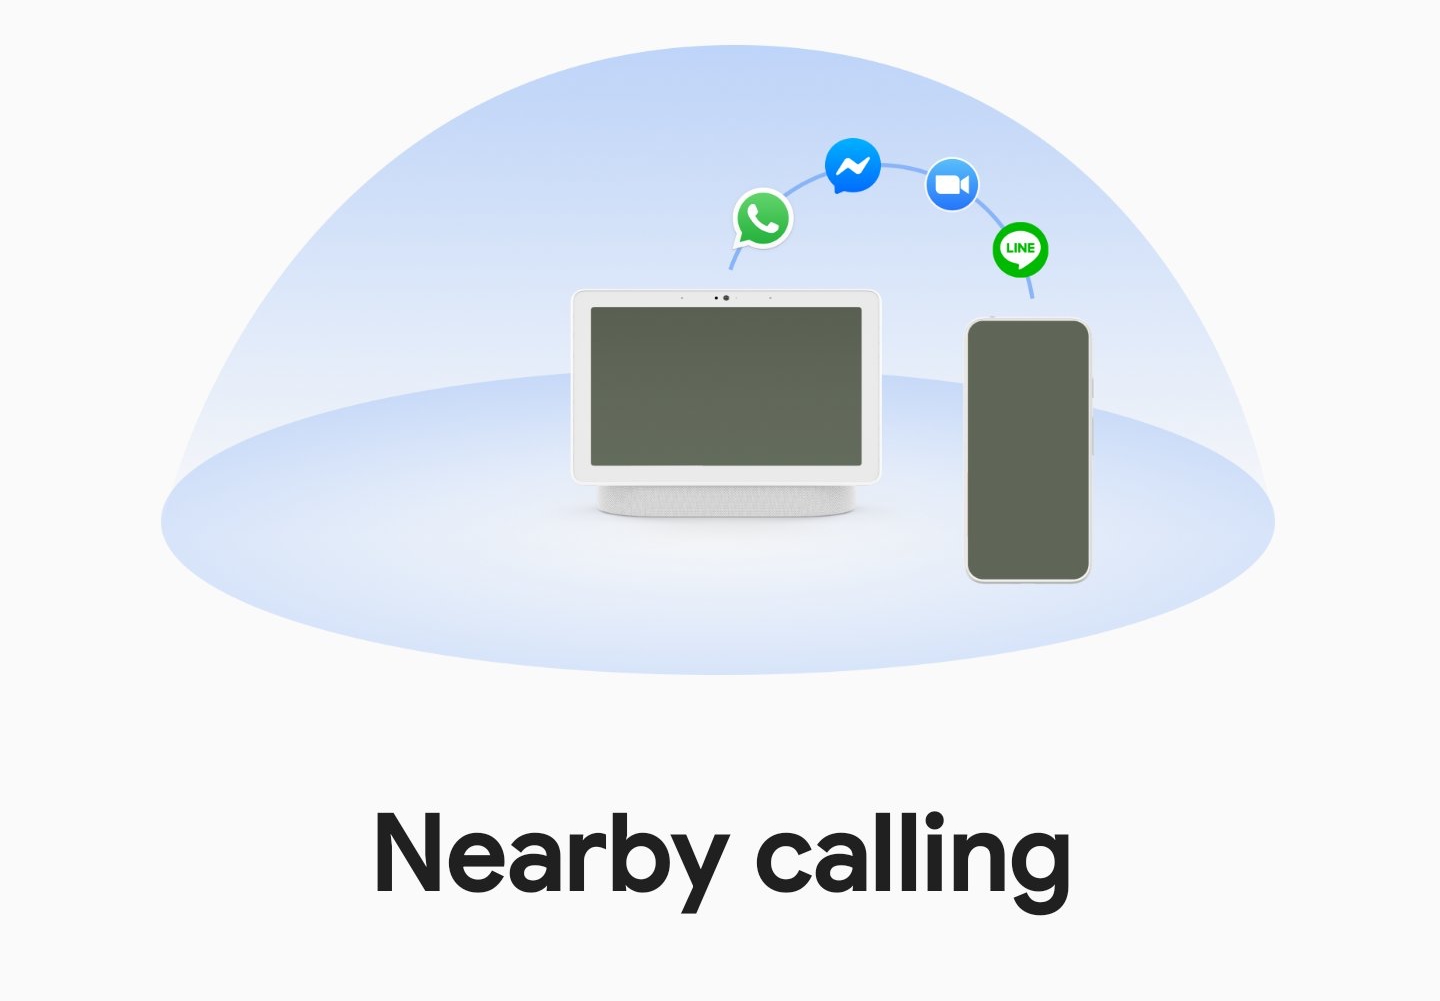 Google is working on Nearby calling feature, it will allow Pixel smartphone owners to answer calls from the Nest Hub smart display